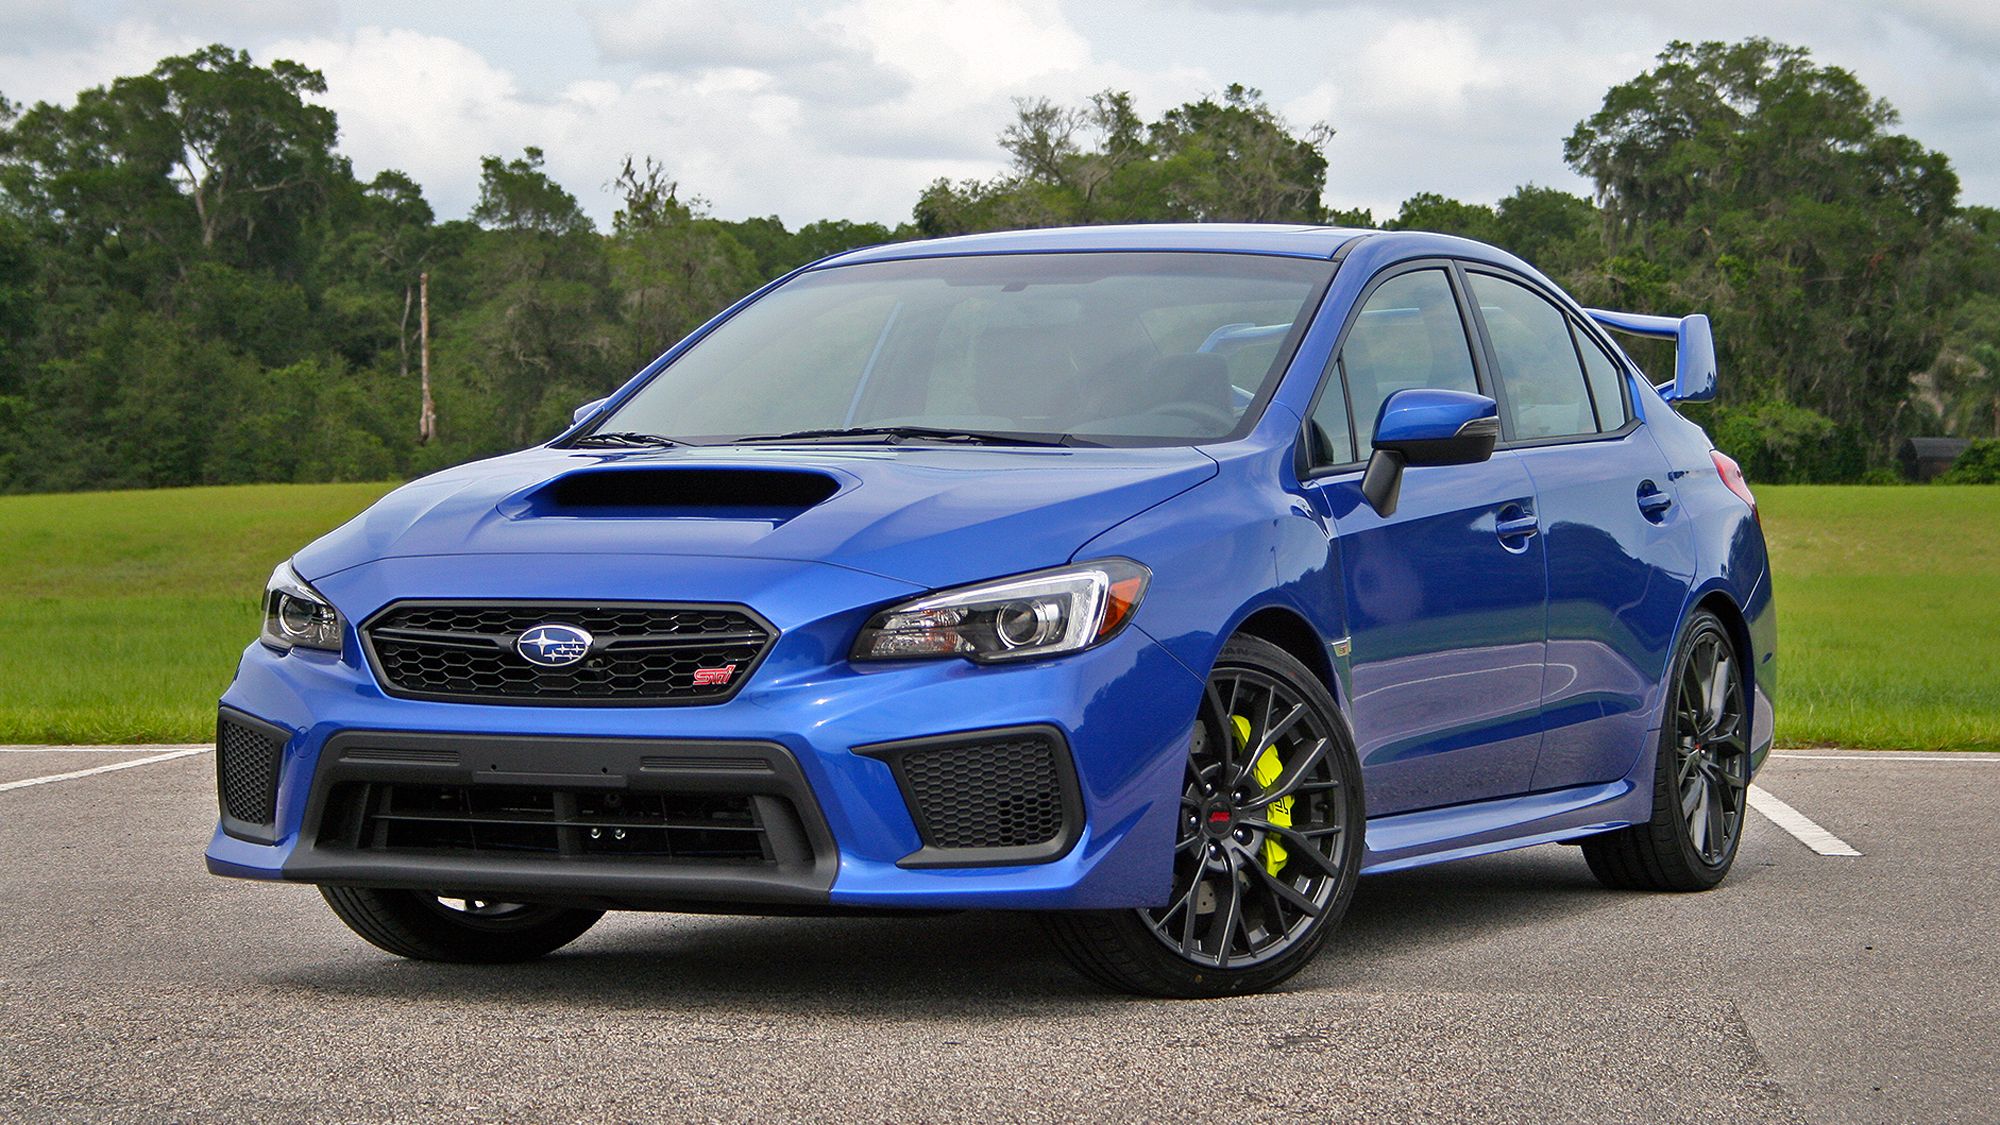 The Highs and Lows of Subaru’s 2018 WRX STI